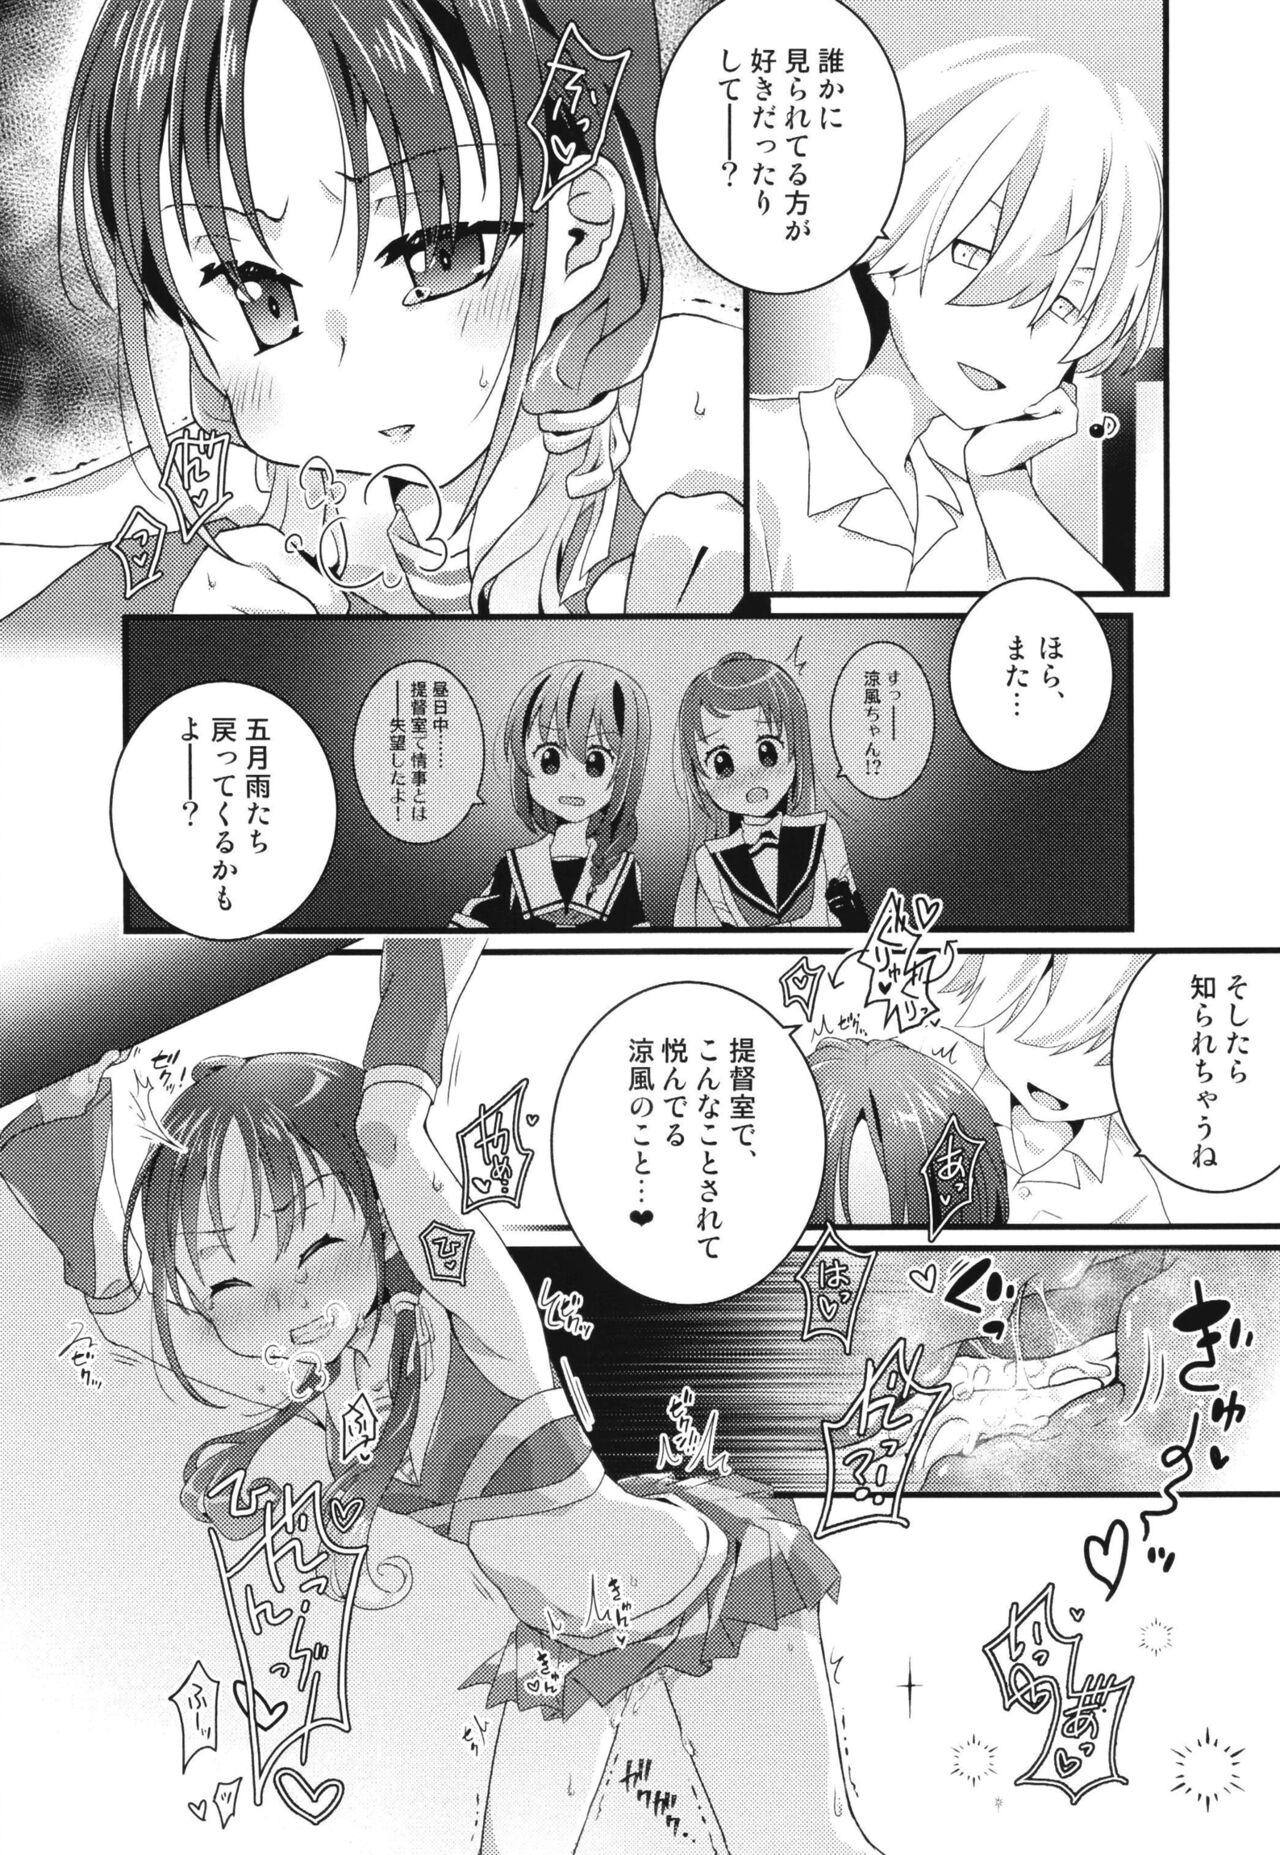 Action Yah! Cheer! yeah! - Kantai collection Amateurs Gone Wild - Page 6